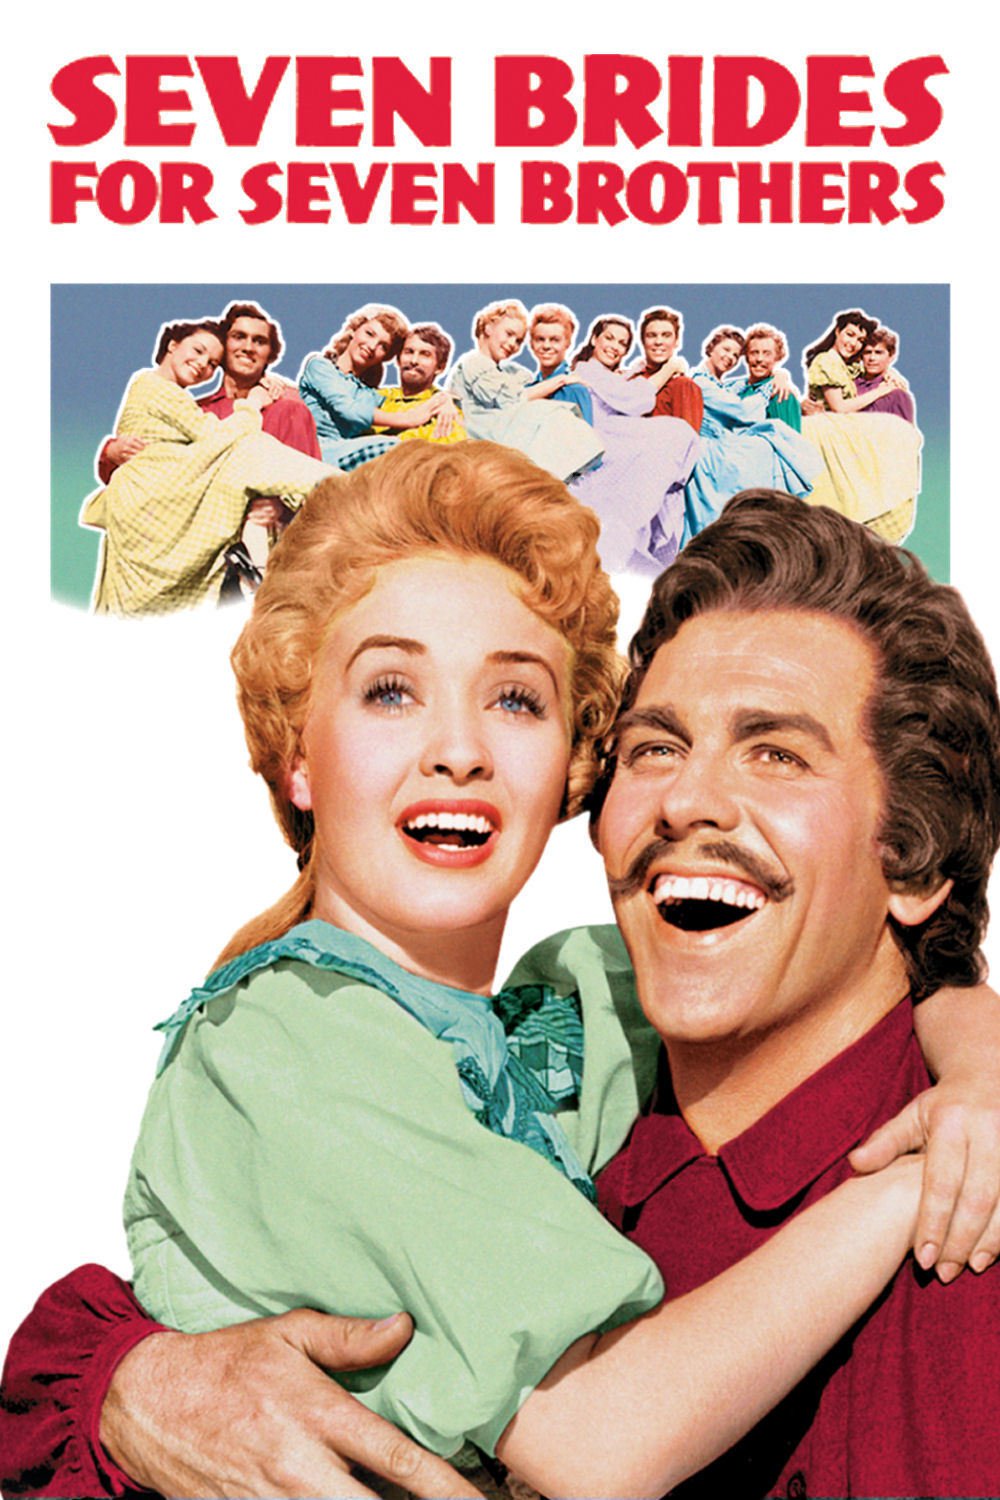 Poster for the movie "Seven Brides for Seven Brothers"